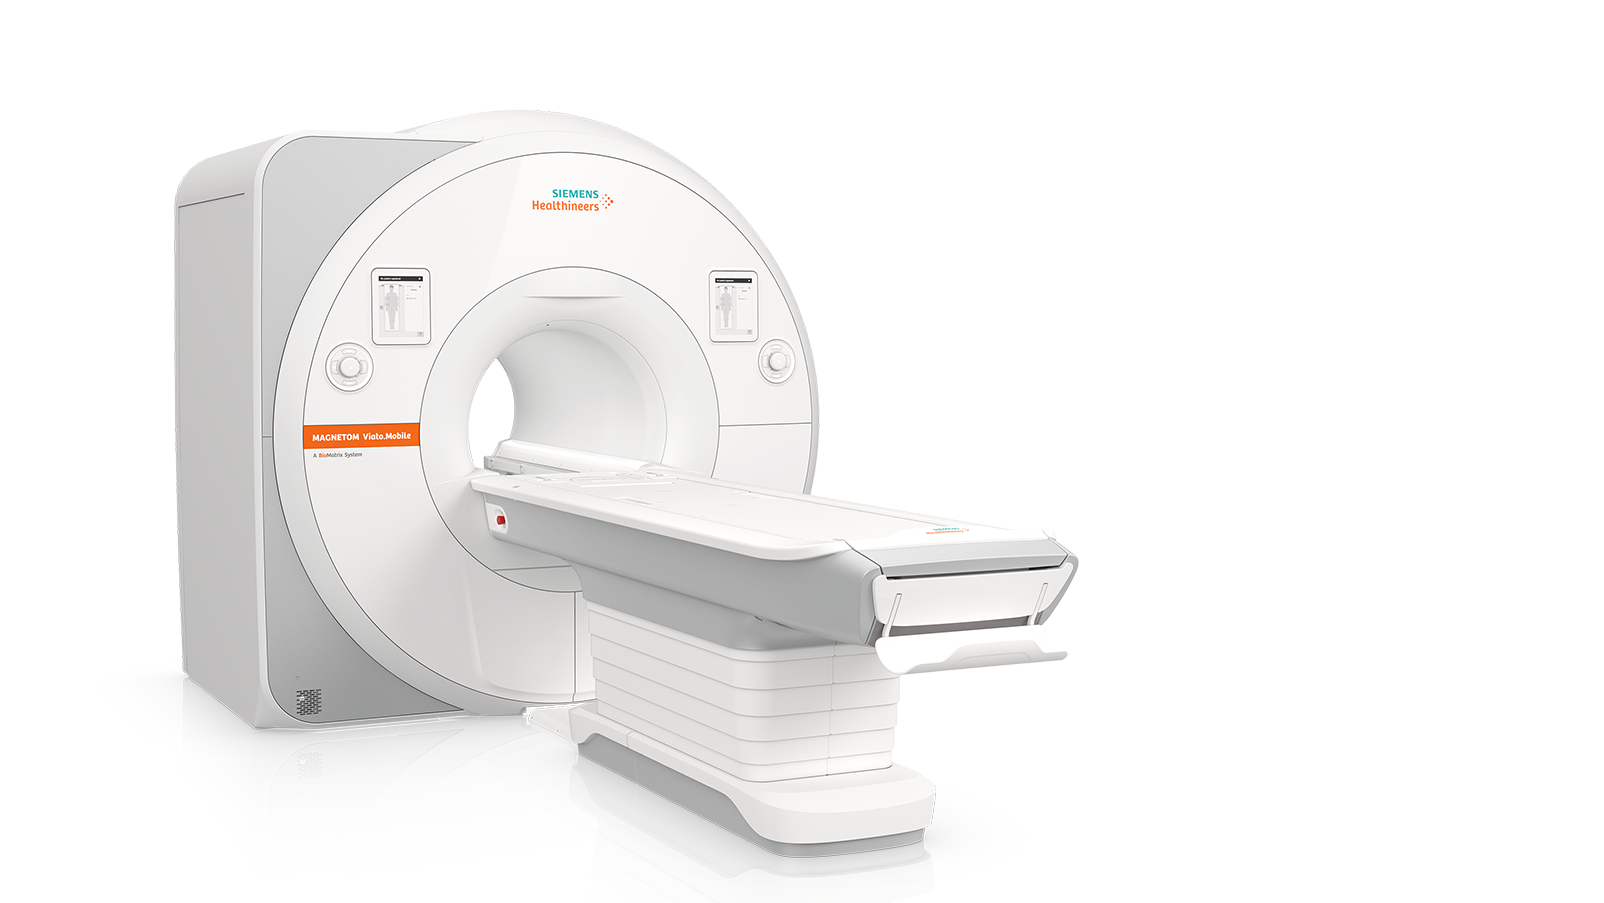 Siemens MRI Scanner Mastery: Advancing Precision and Performance in Medical Diagnostics